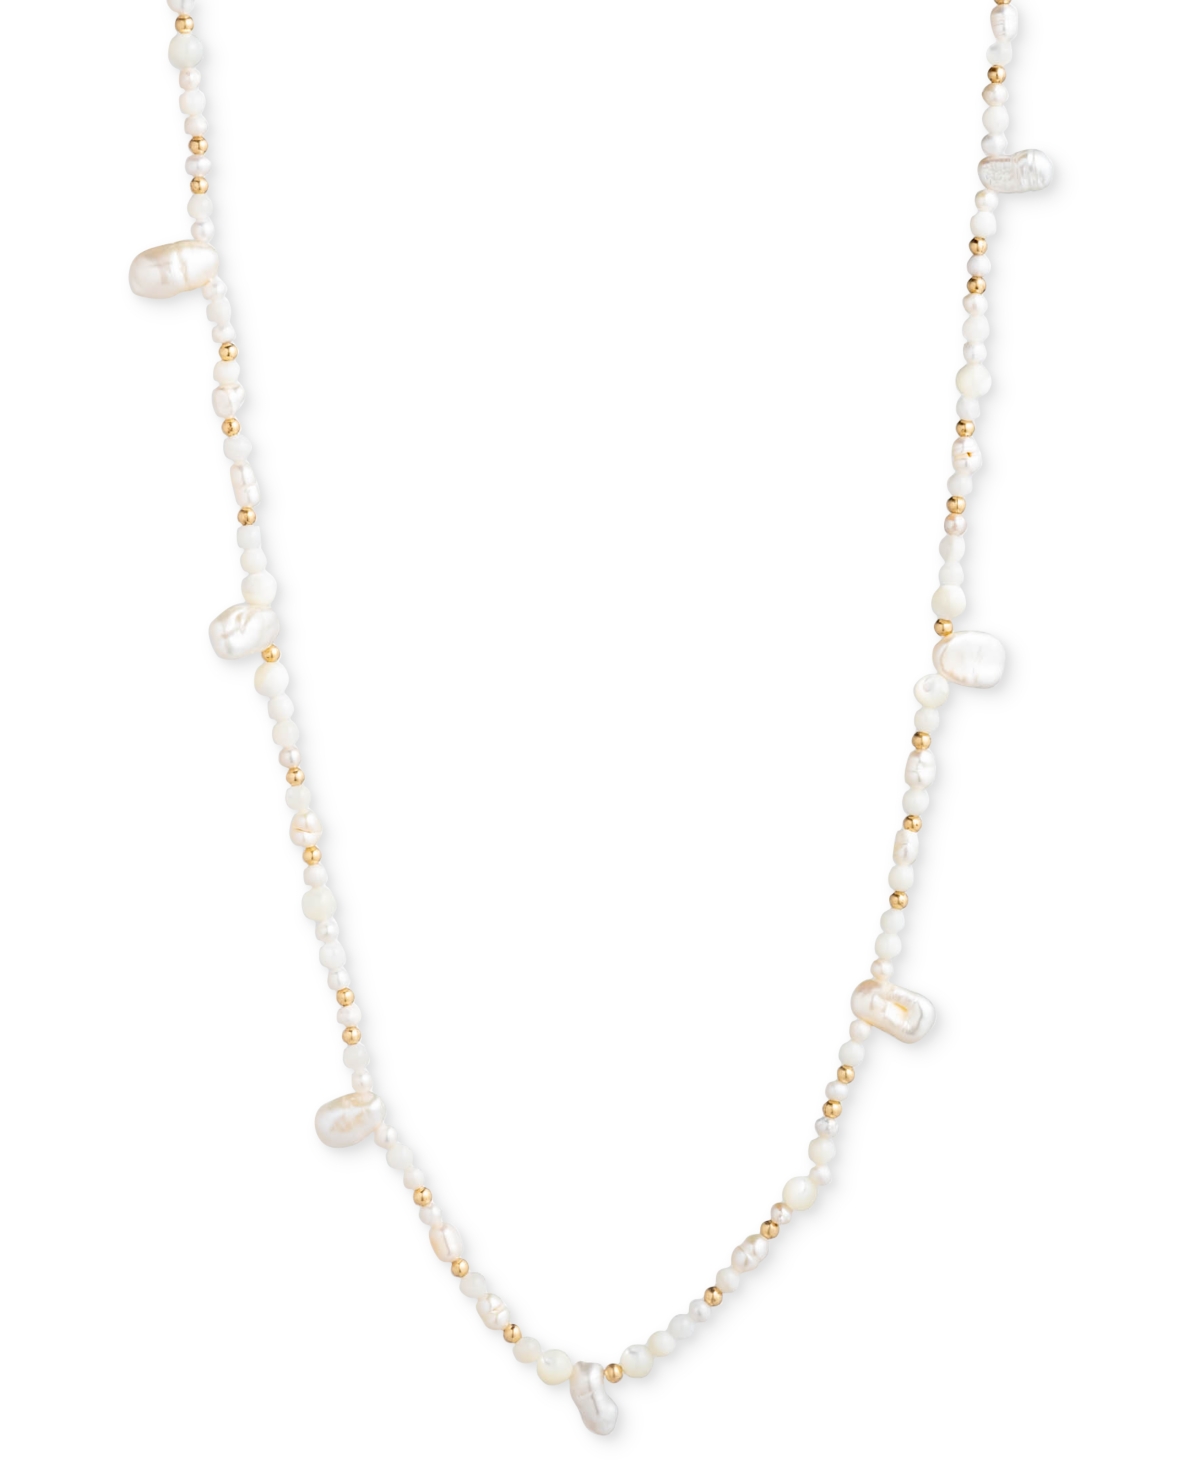 Gold-Tone Beaded Strand Necklace, 32" + 3" extender - Pearl